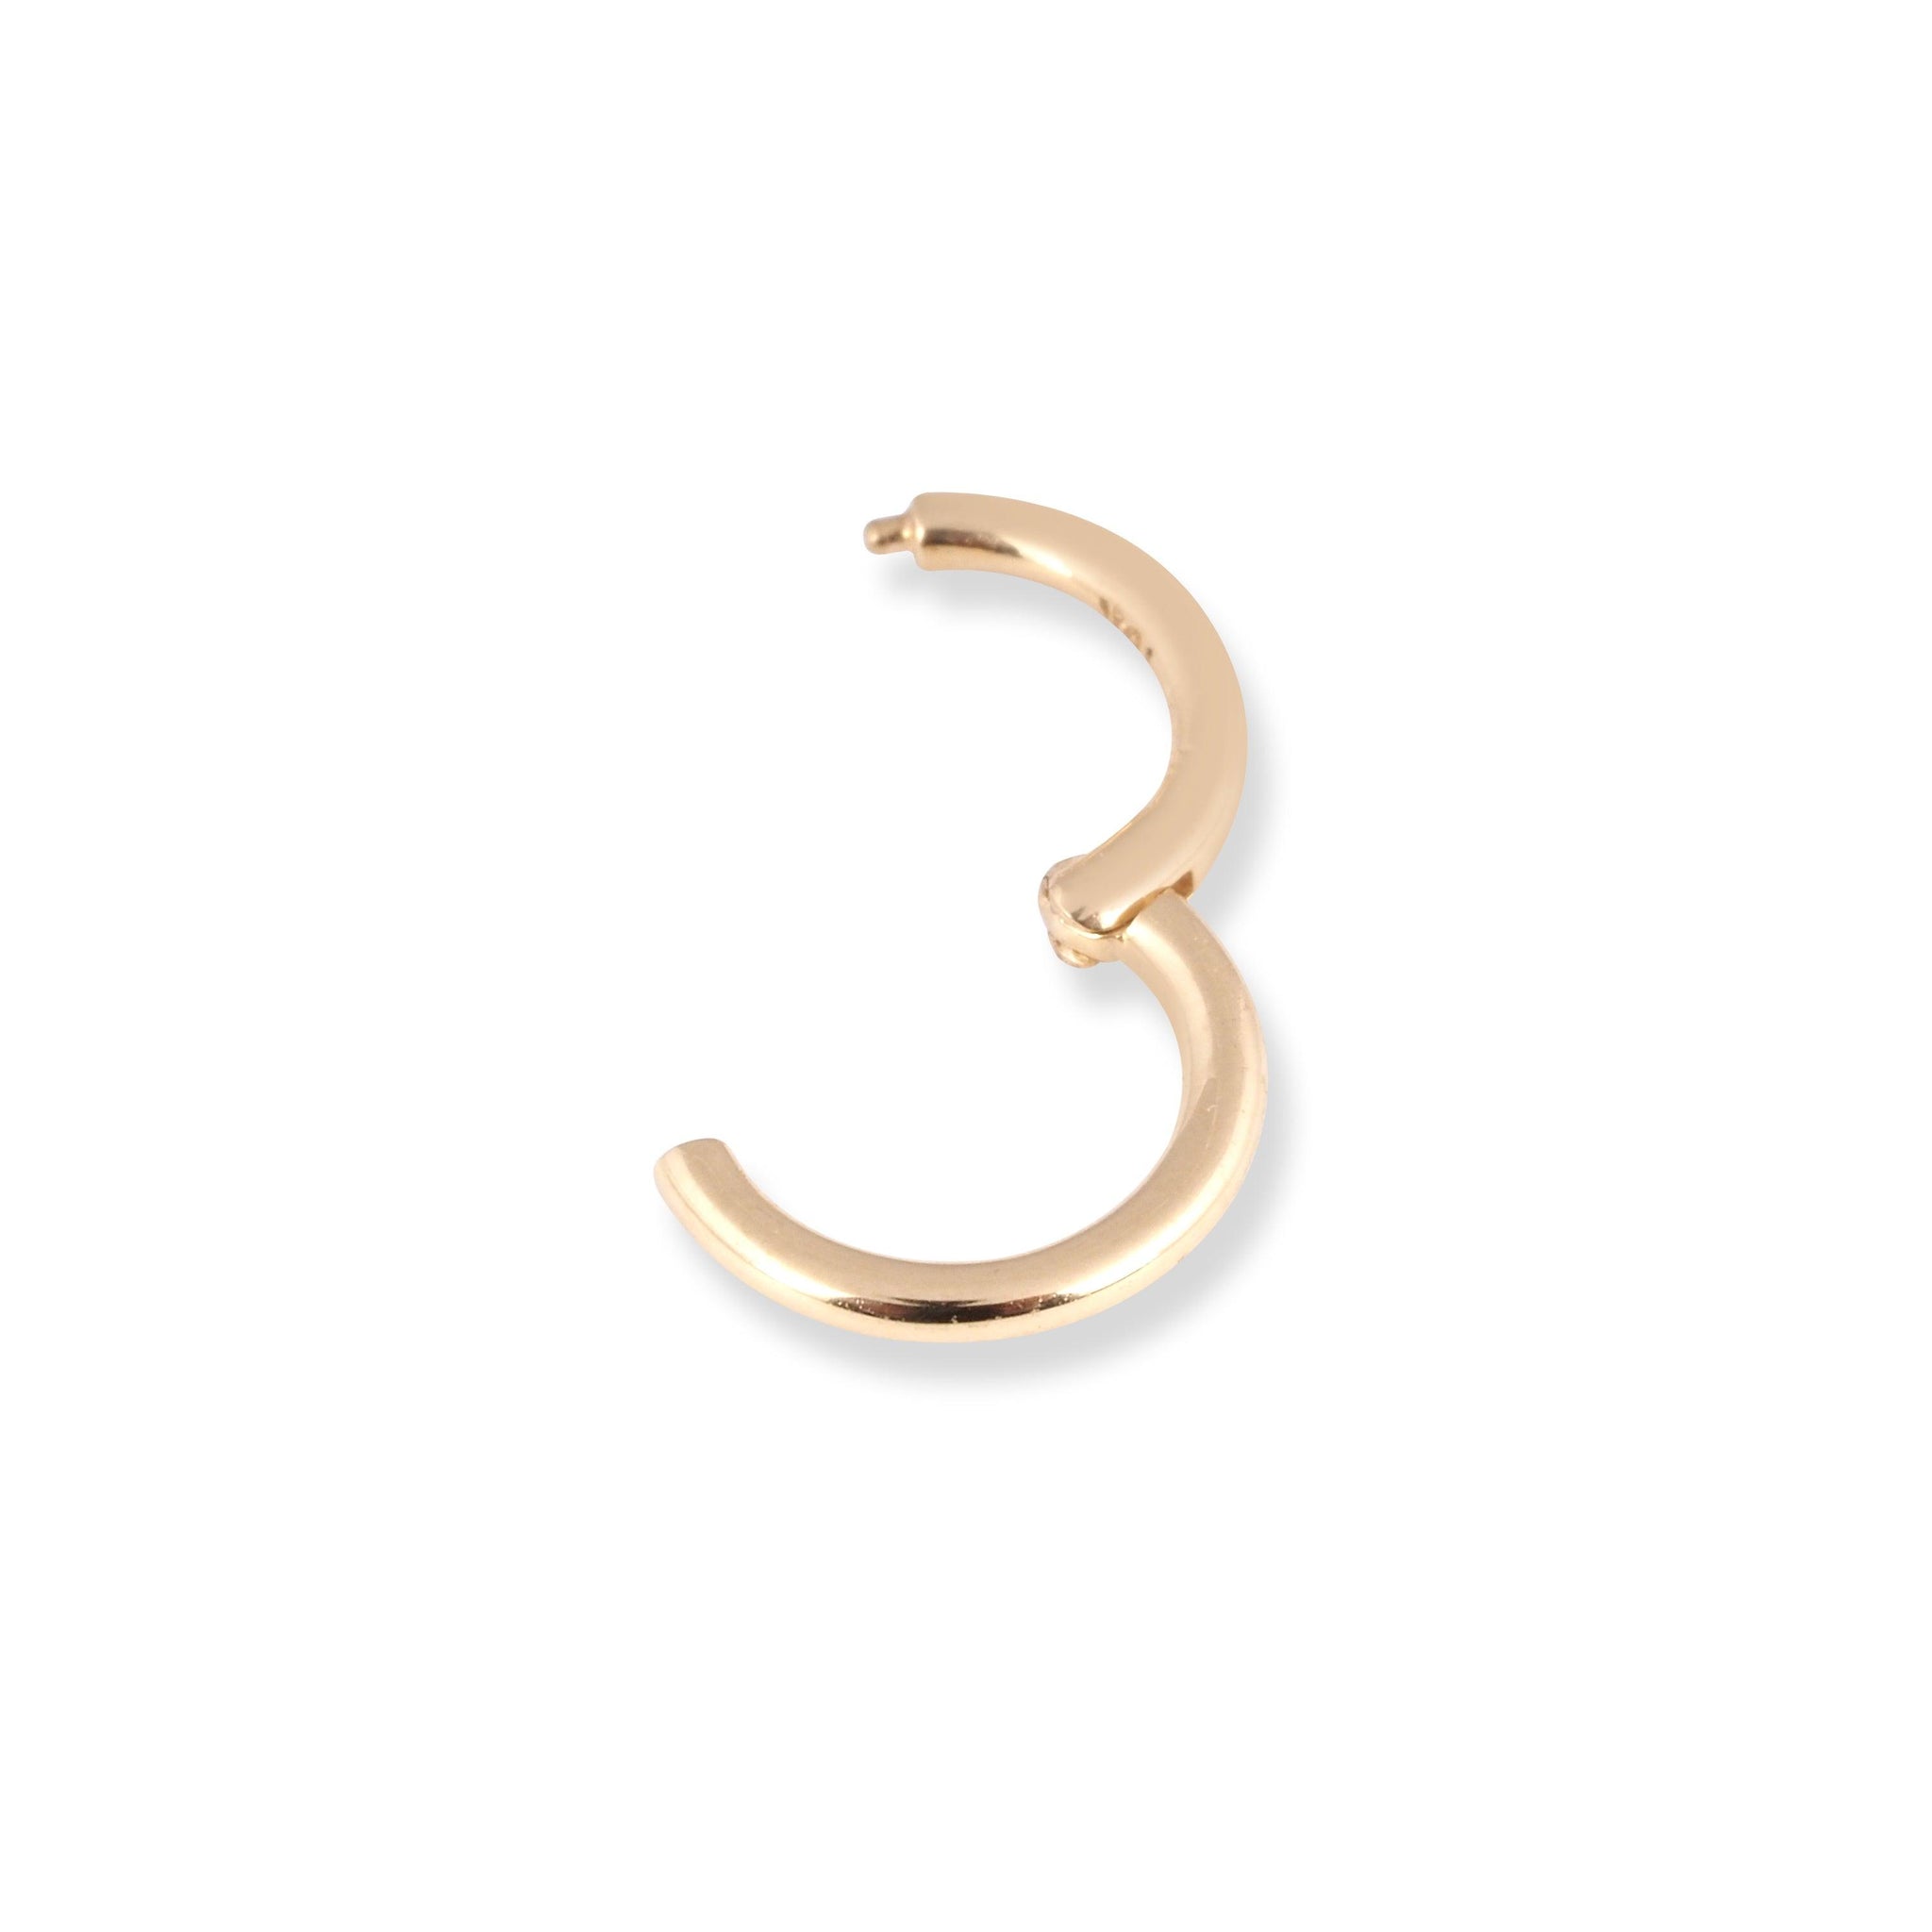 18ct Yellow Gold Plain Finish Nose Ring NR-7832